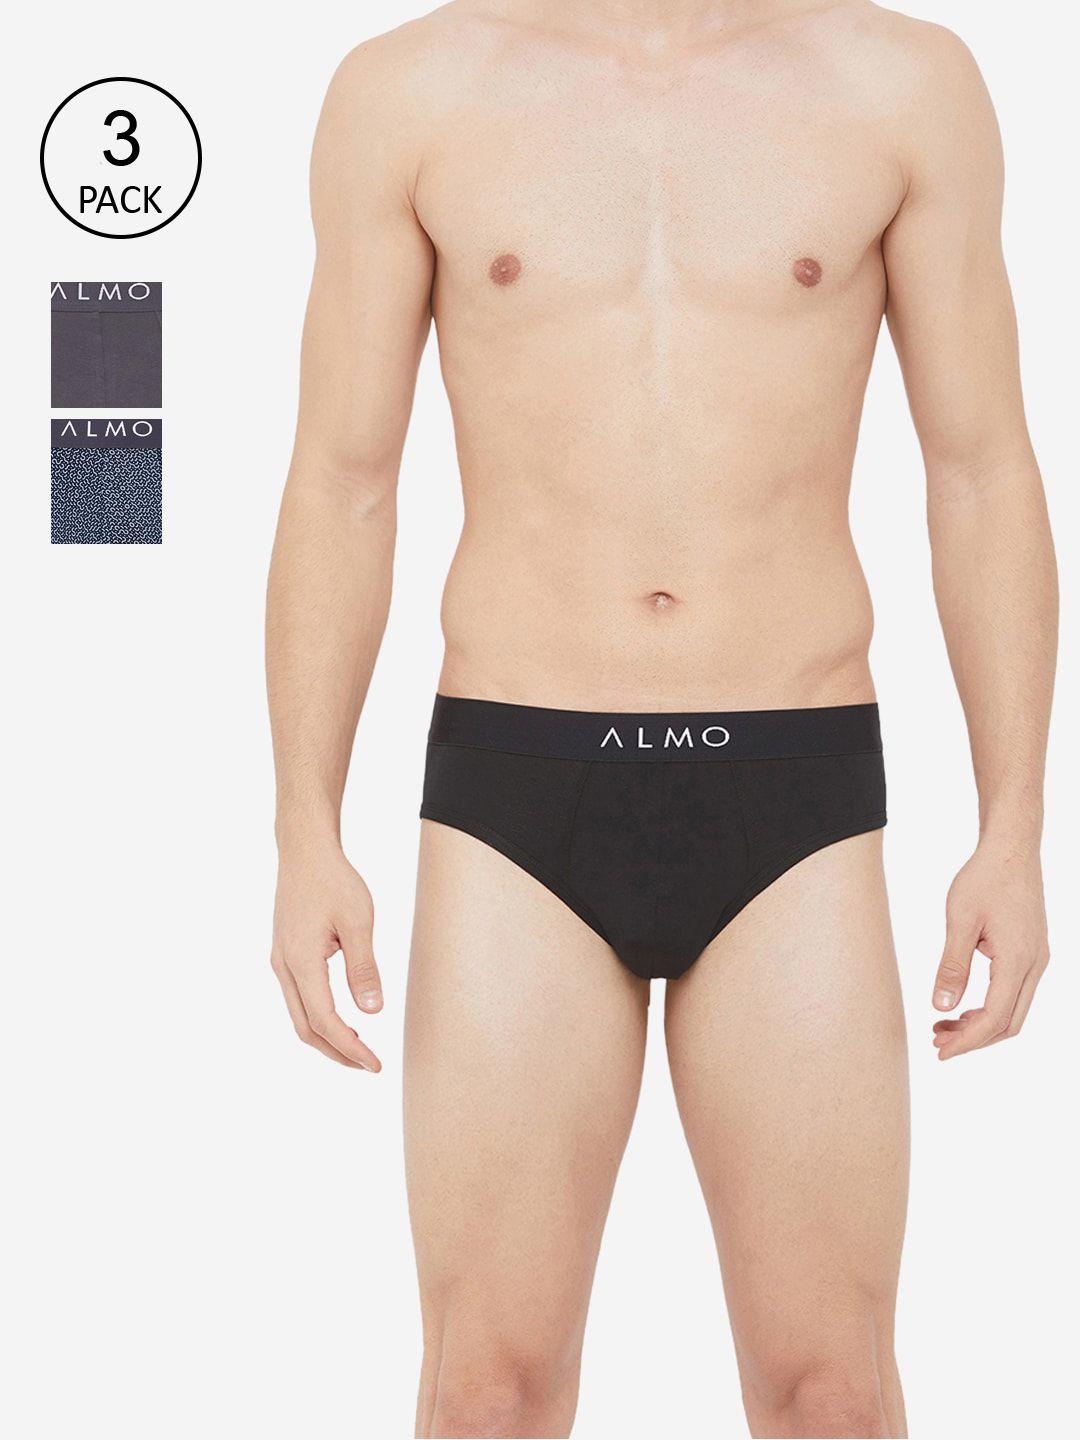 almo-wear-men-pack-of-3-organic-cotton-mixed-pattern-combo-briefs